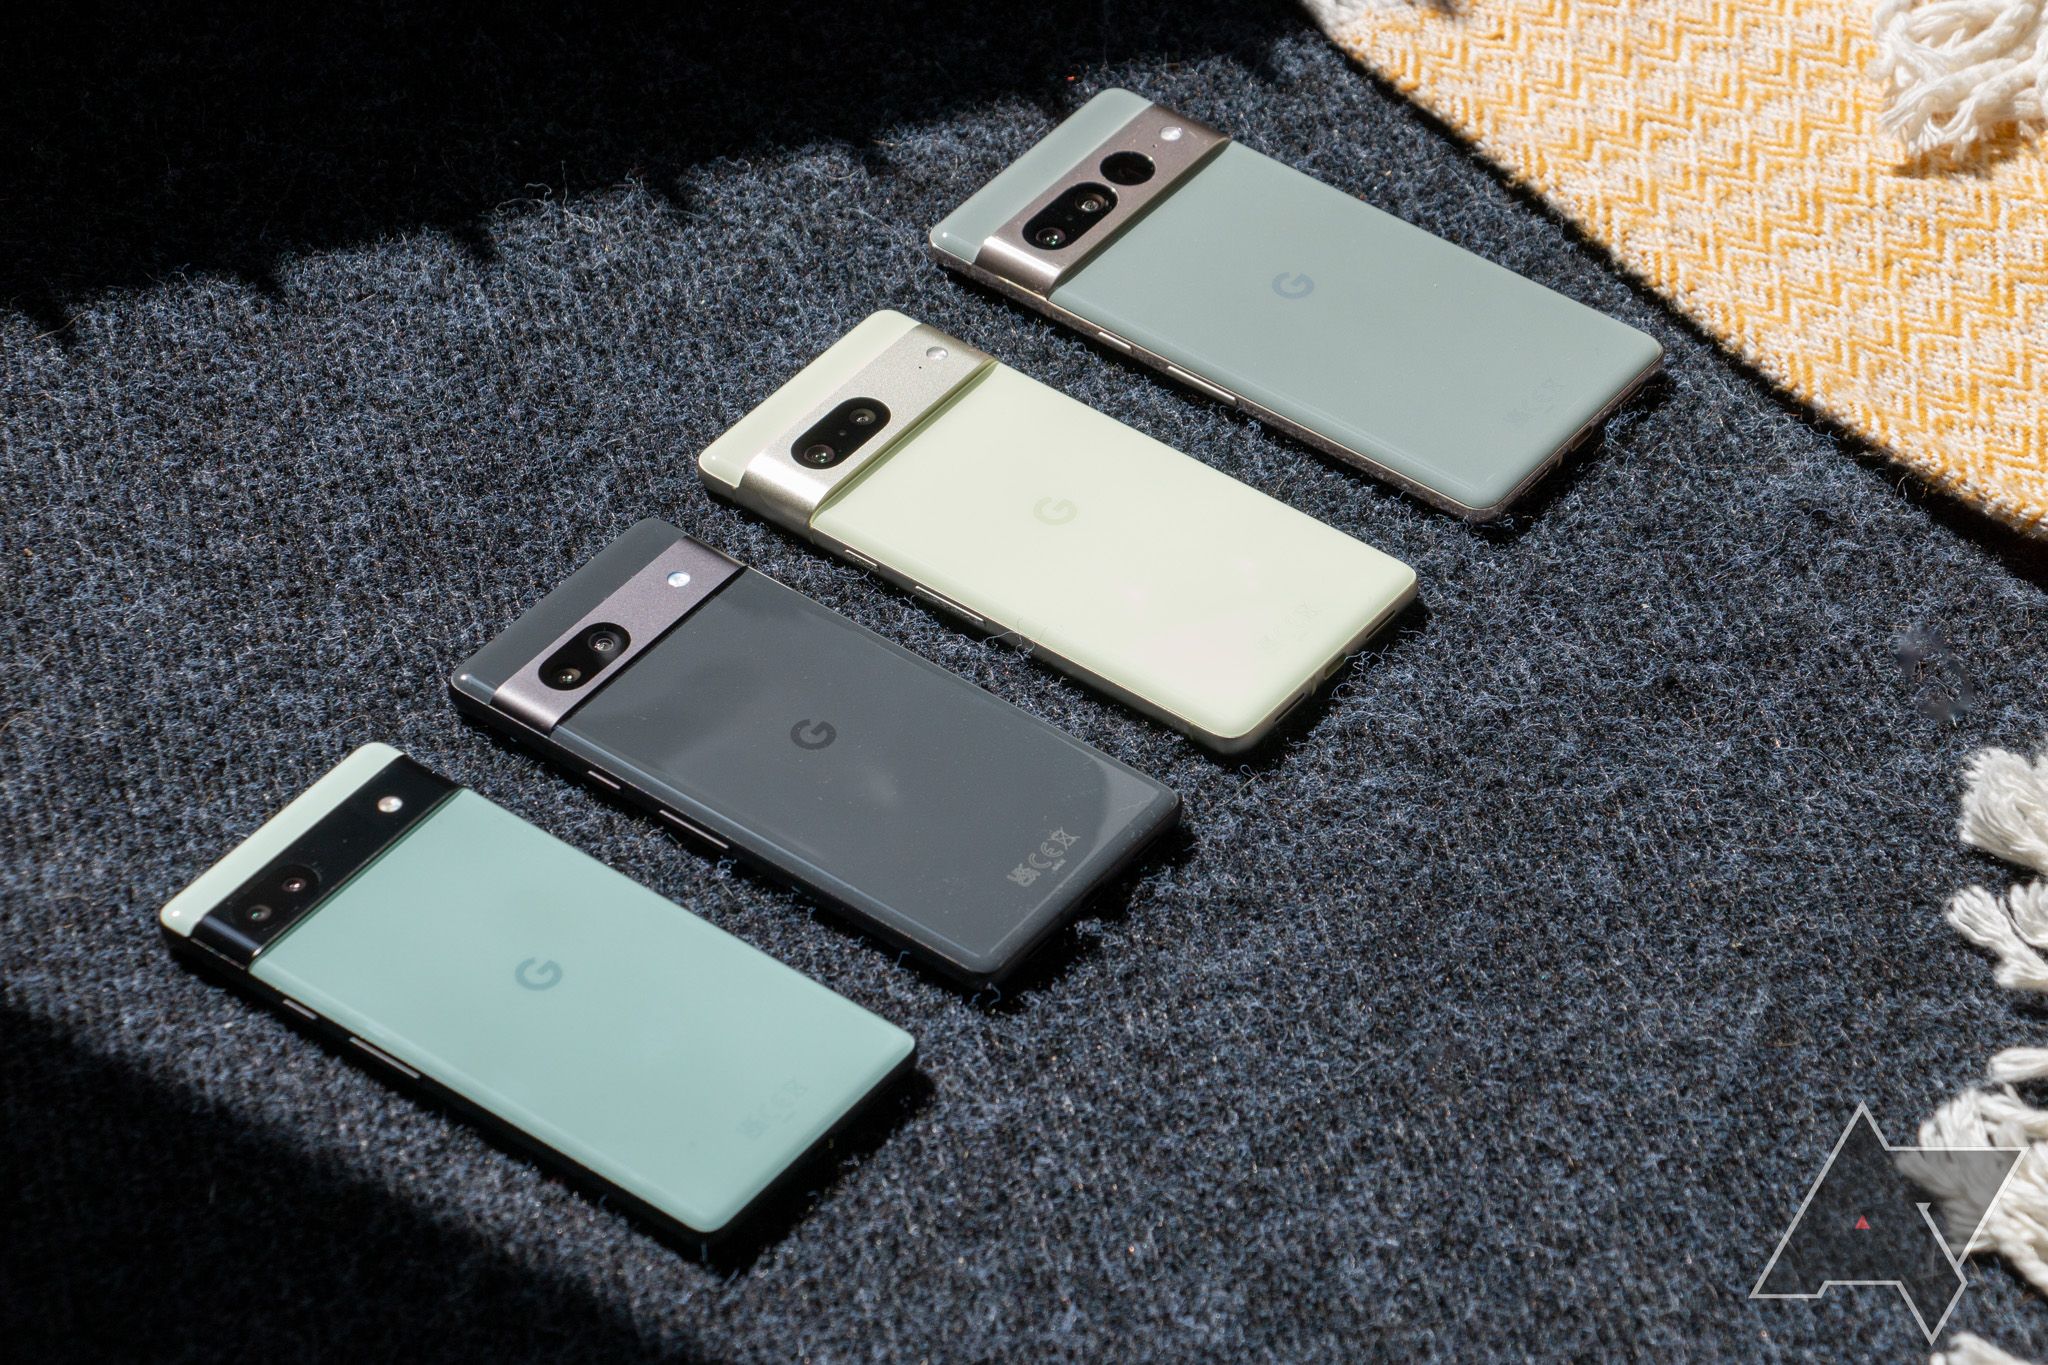 Several generations of Google Pixel phones side-by-side on fabric.